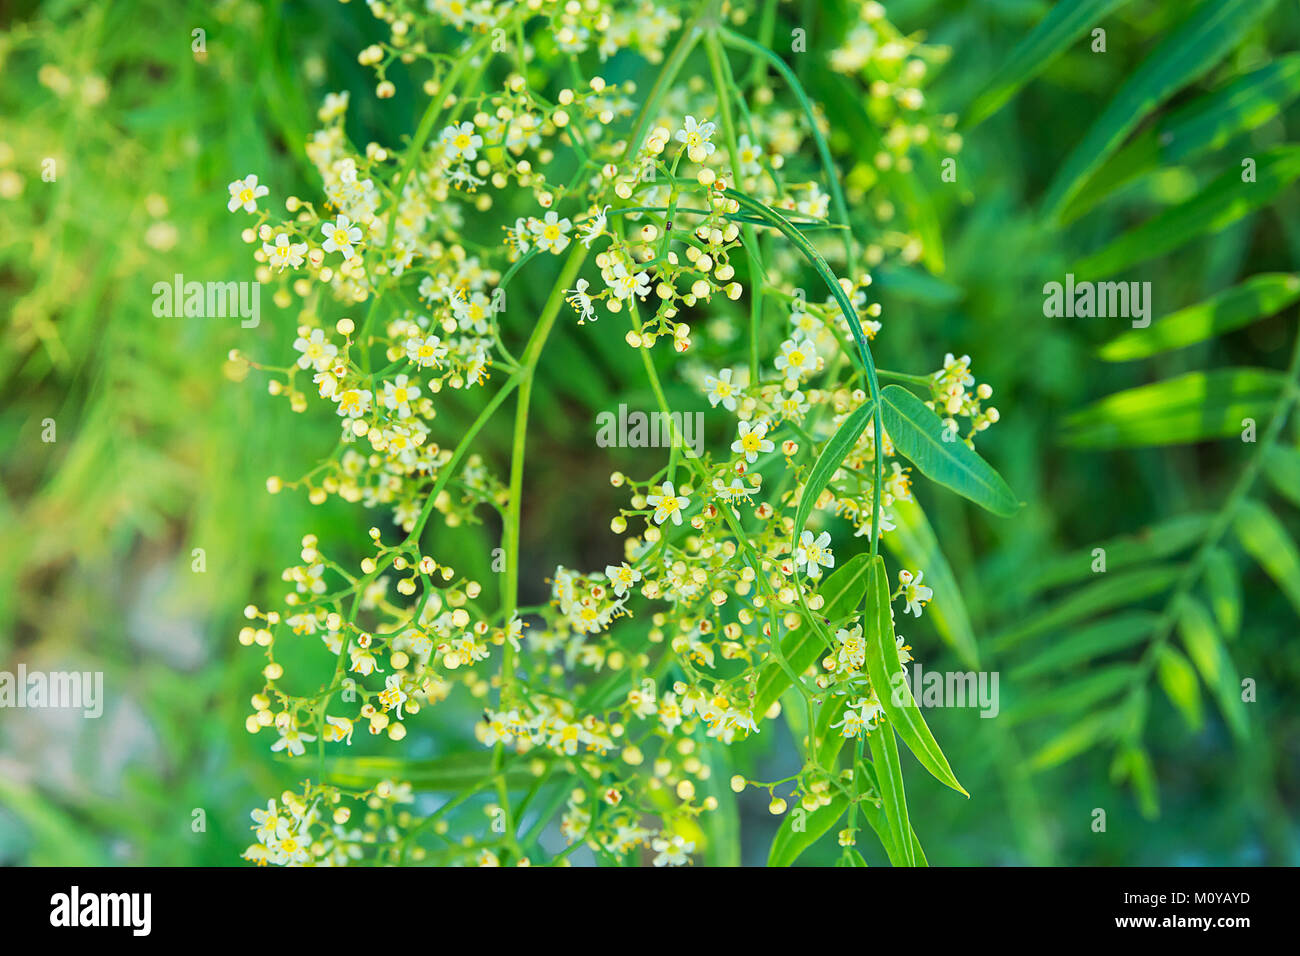 Dangling Tree Branch with Young Fresh Green Leaves and Beautiful Tender Small White Flowers. Vibrant Pastel Colors Golden Sunlight Flare. Easter Spari Stock Photo